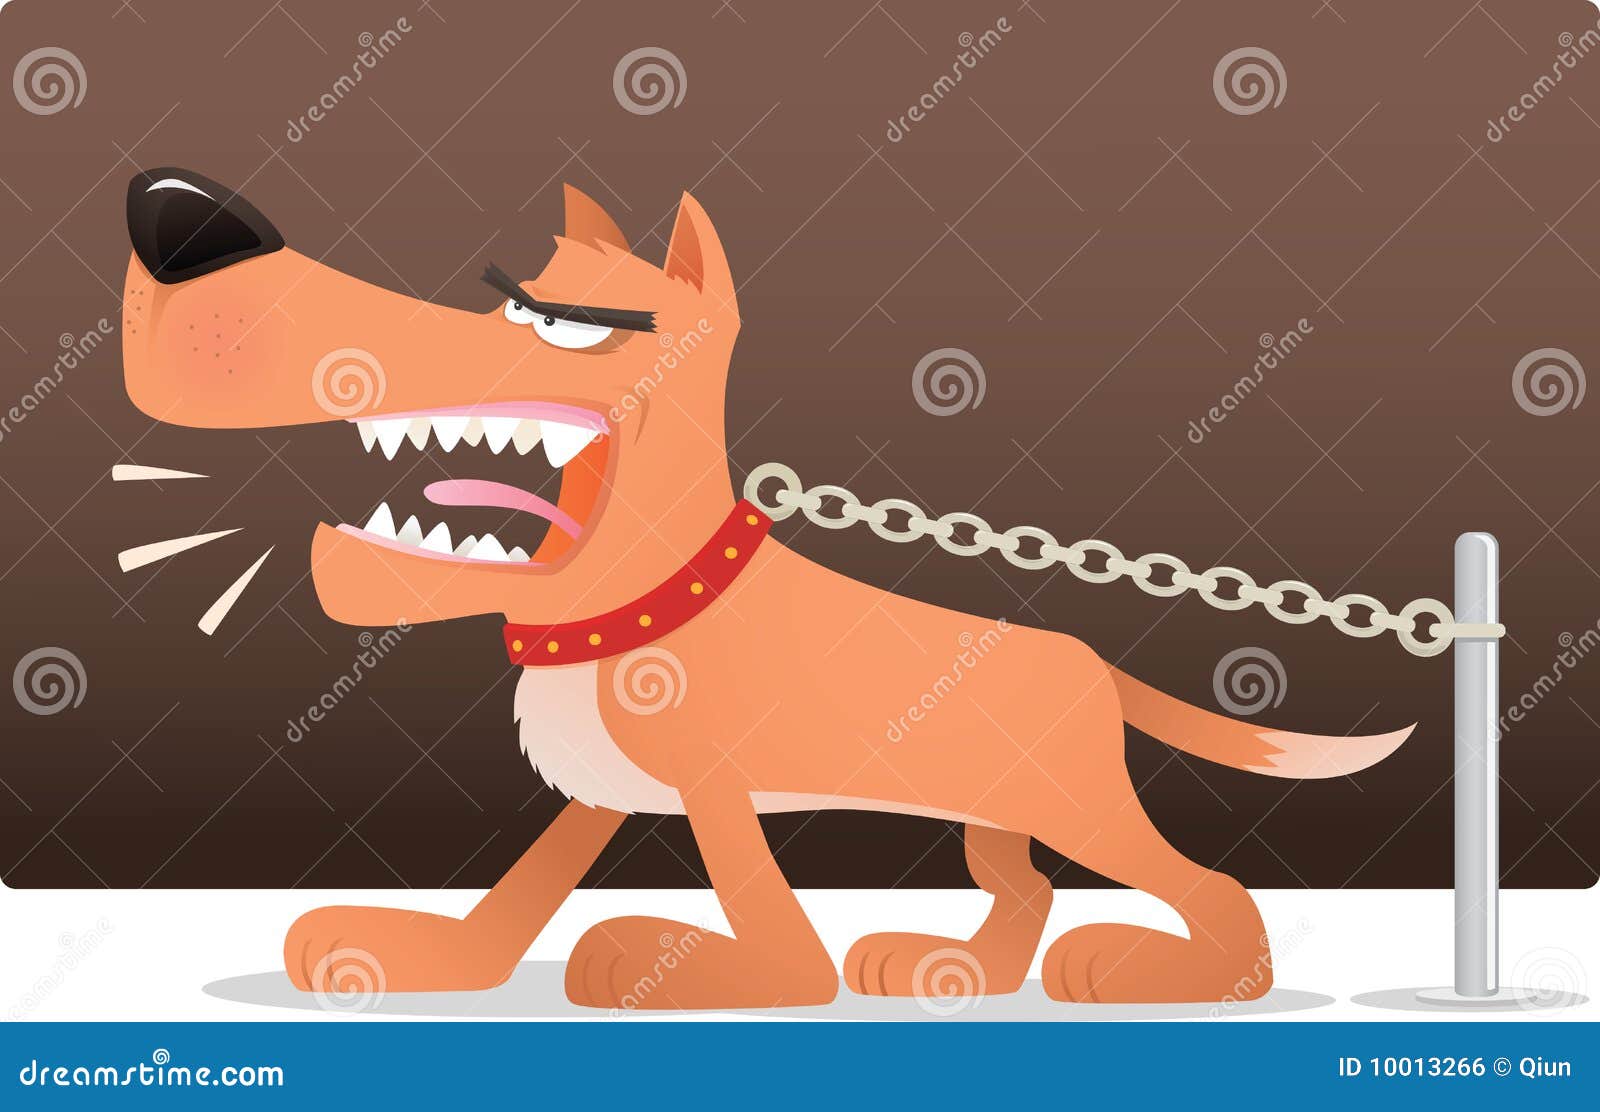 Barking Cartoons, Illustrations & Vector Stock Images - 3788 Pictures